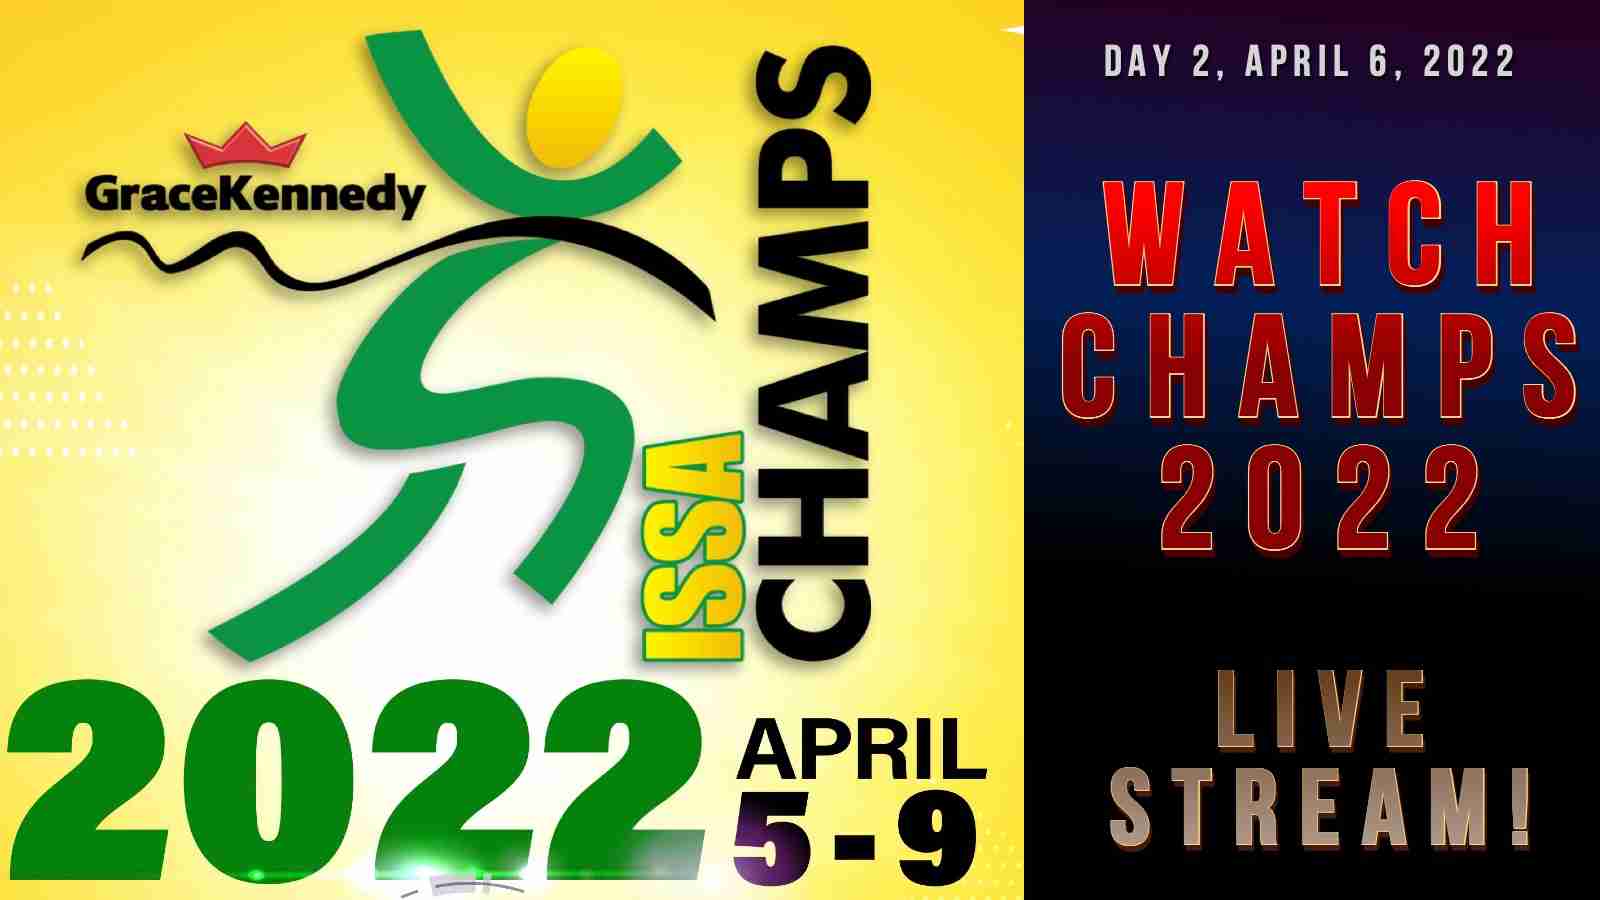 Watch_Champs2022_live_streaming_day2